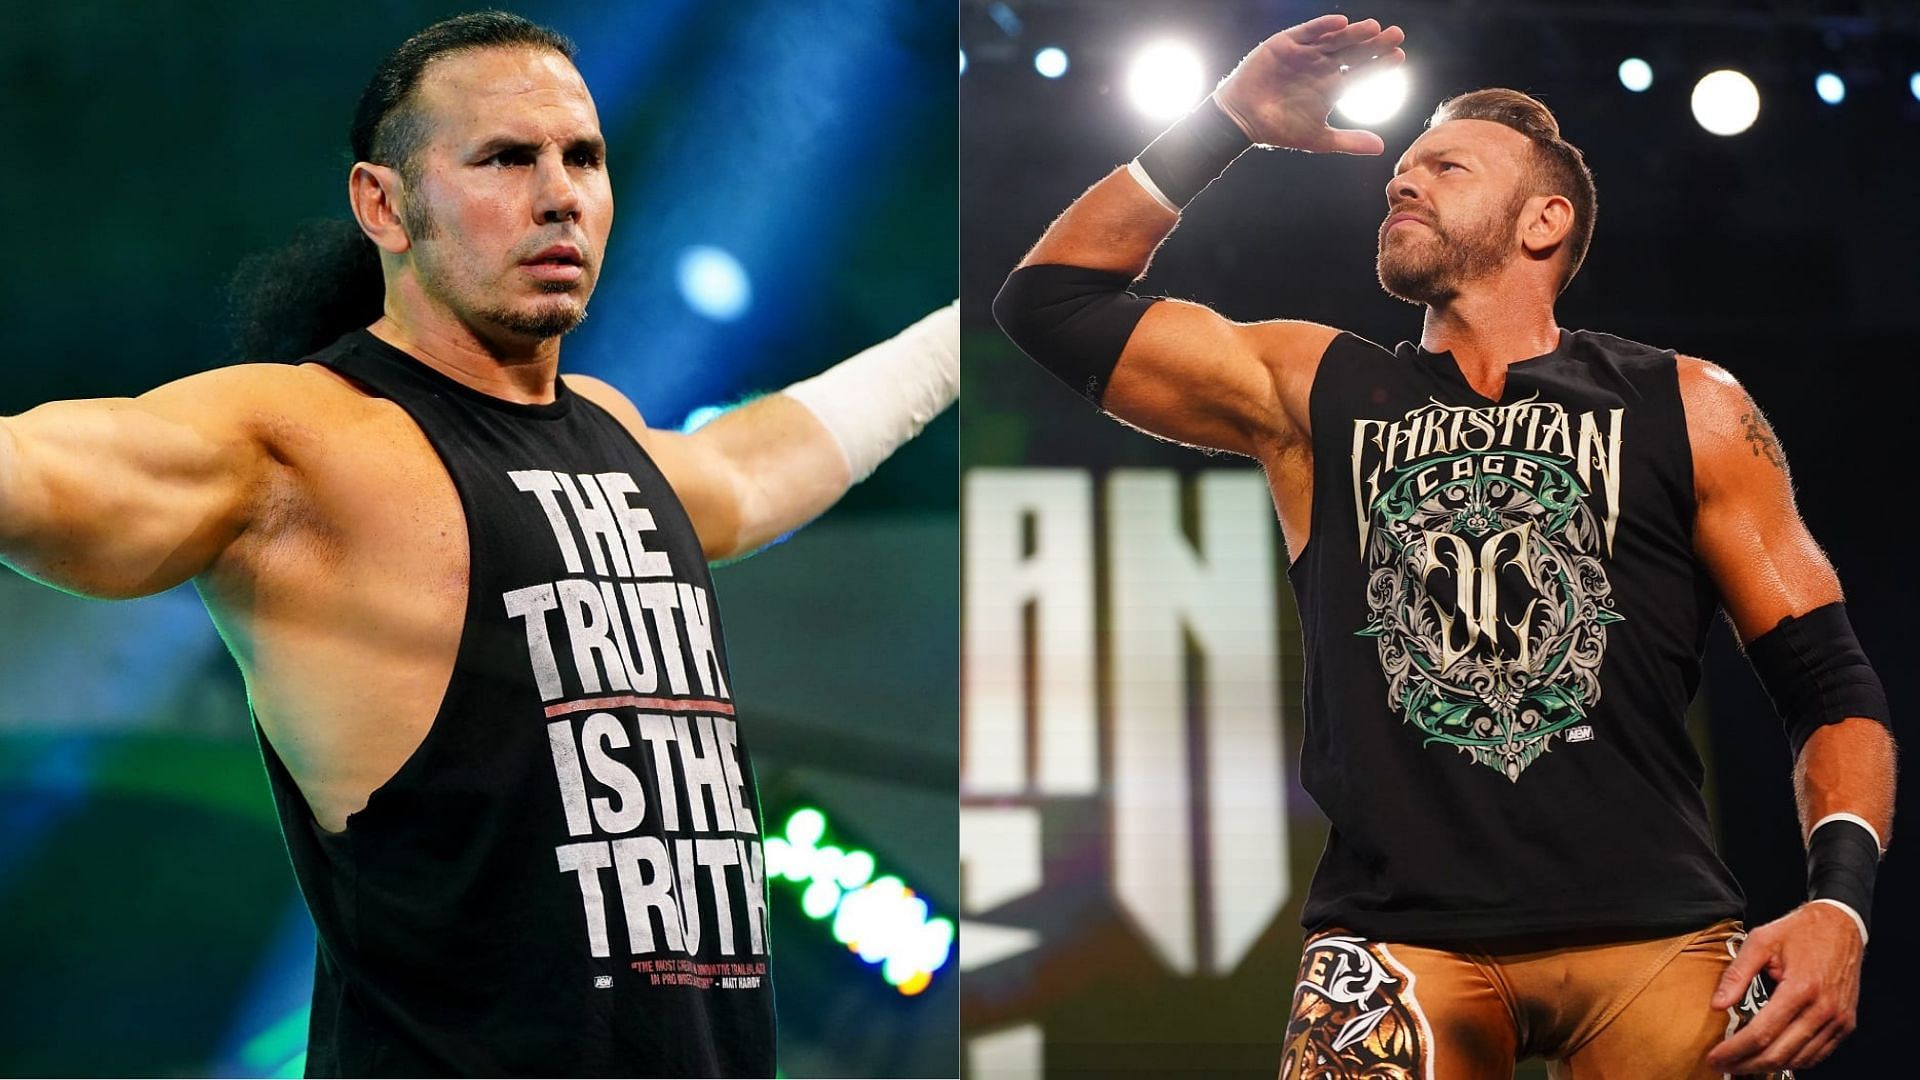 Could Christian Cage and Matt Hardy join forces?